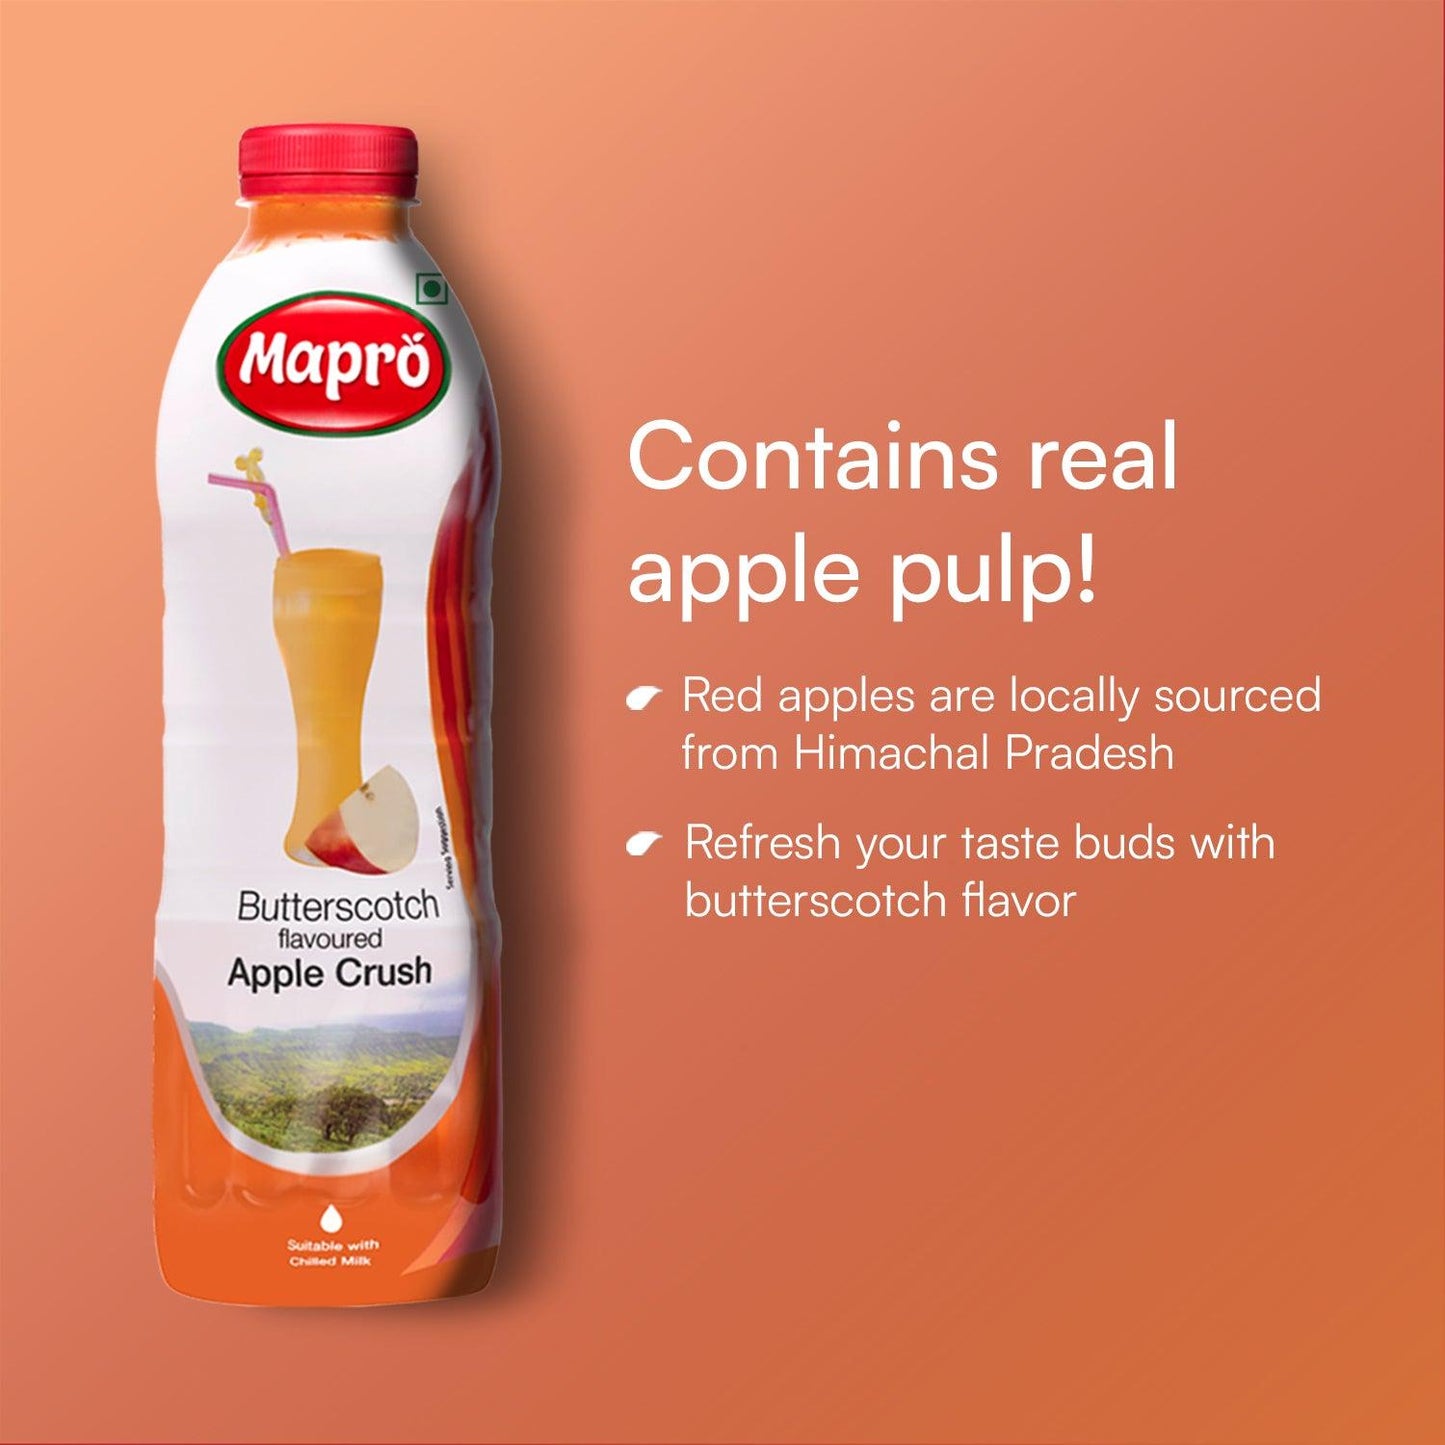 qualities of mapro Butterscotch flavoured Apple Crush